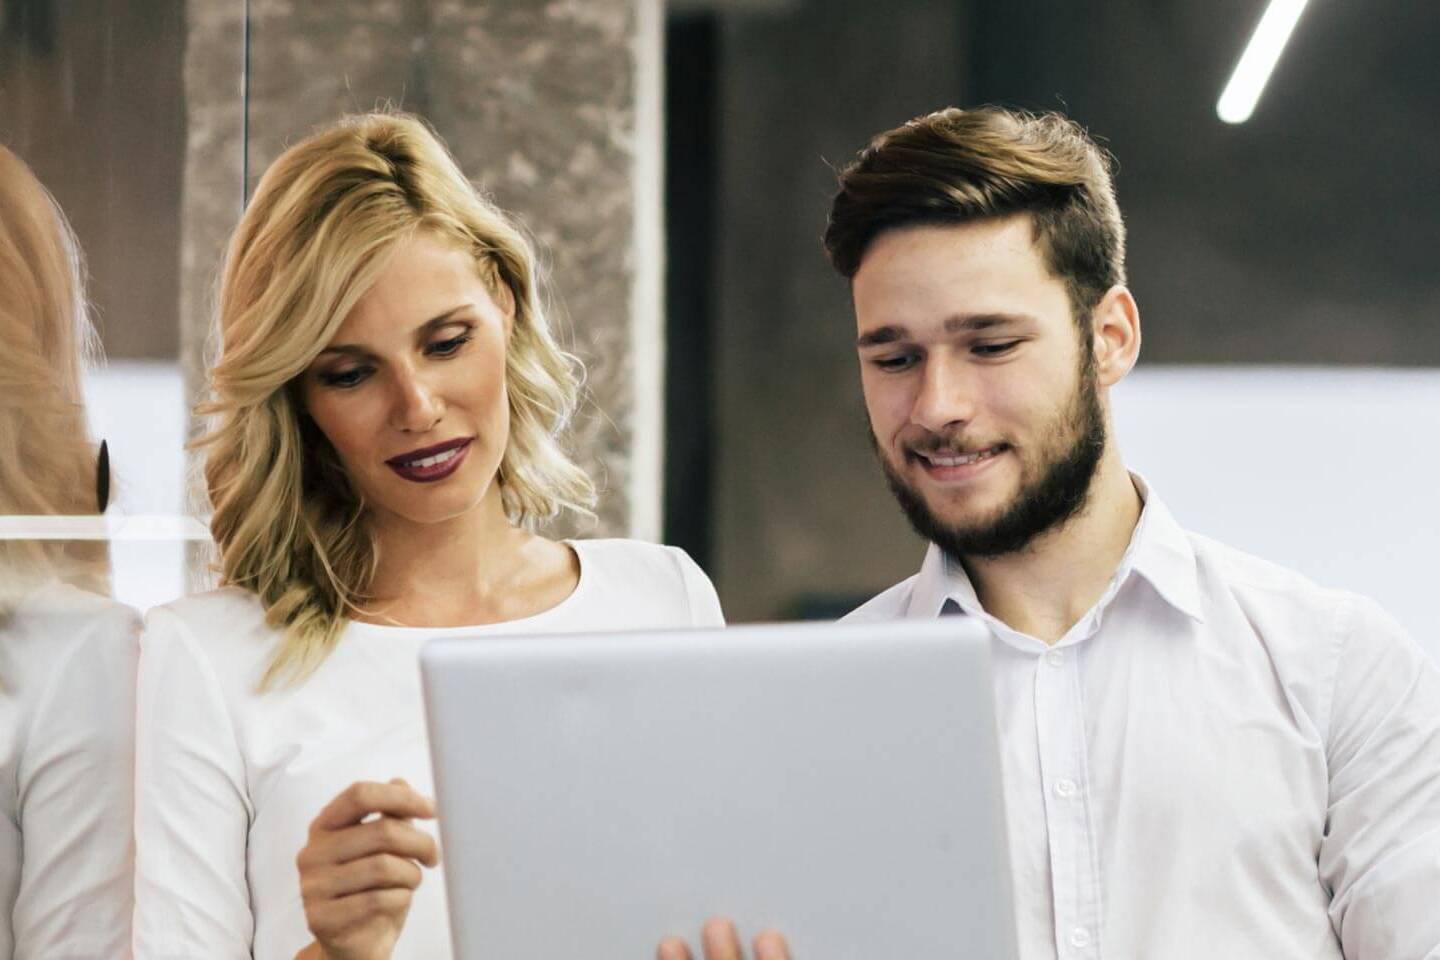 a man and a woman in business casual attire standing and reviewing information on a laptop